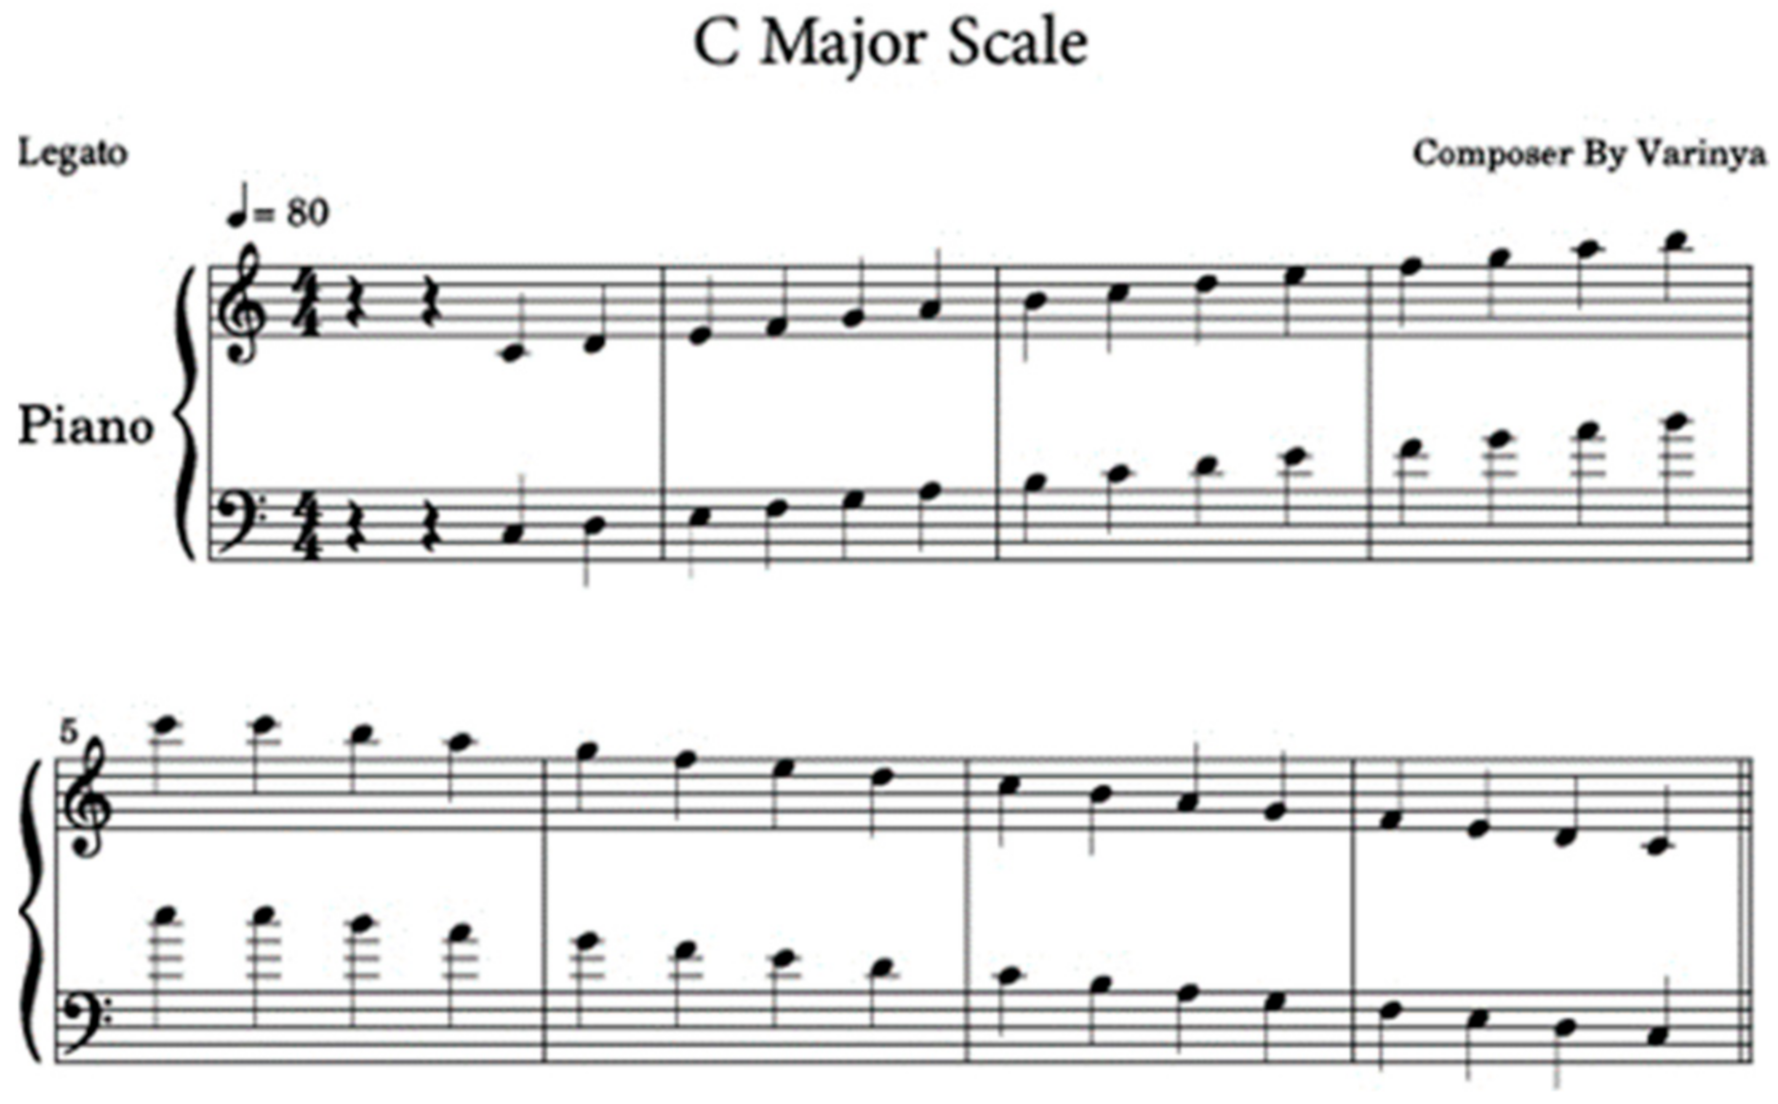 End Game sheet music for voice, piano or guitar (PDF-interactive)